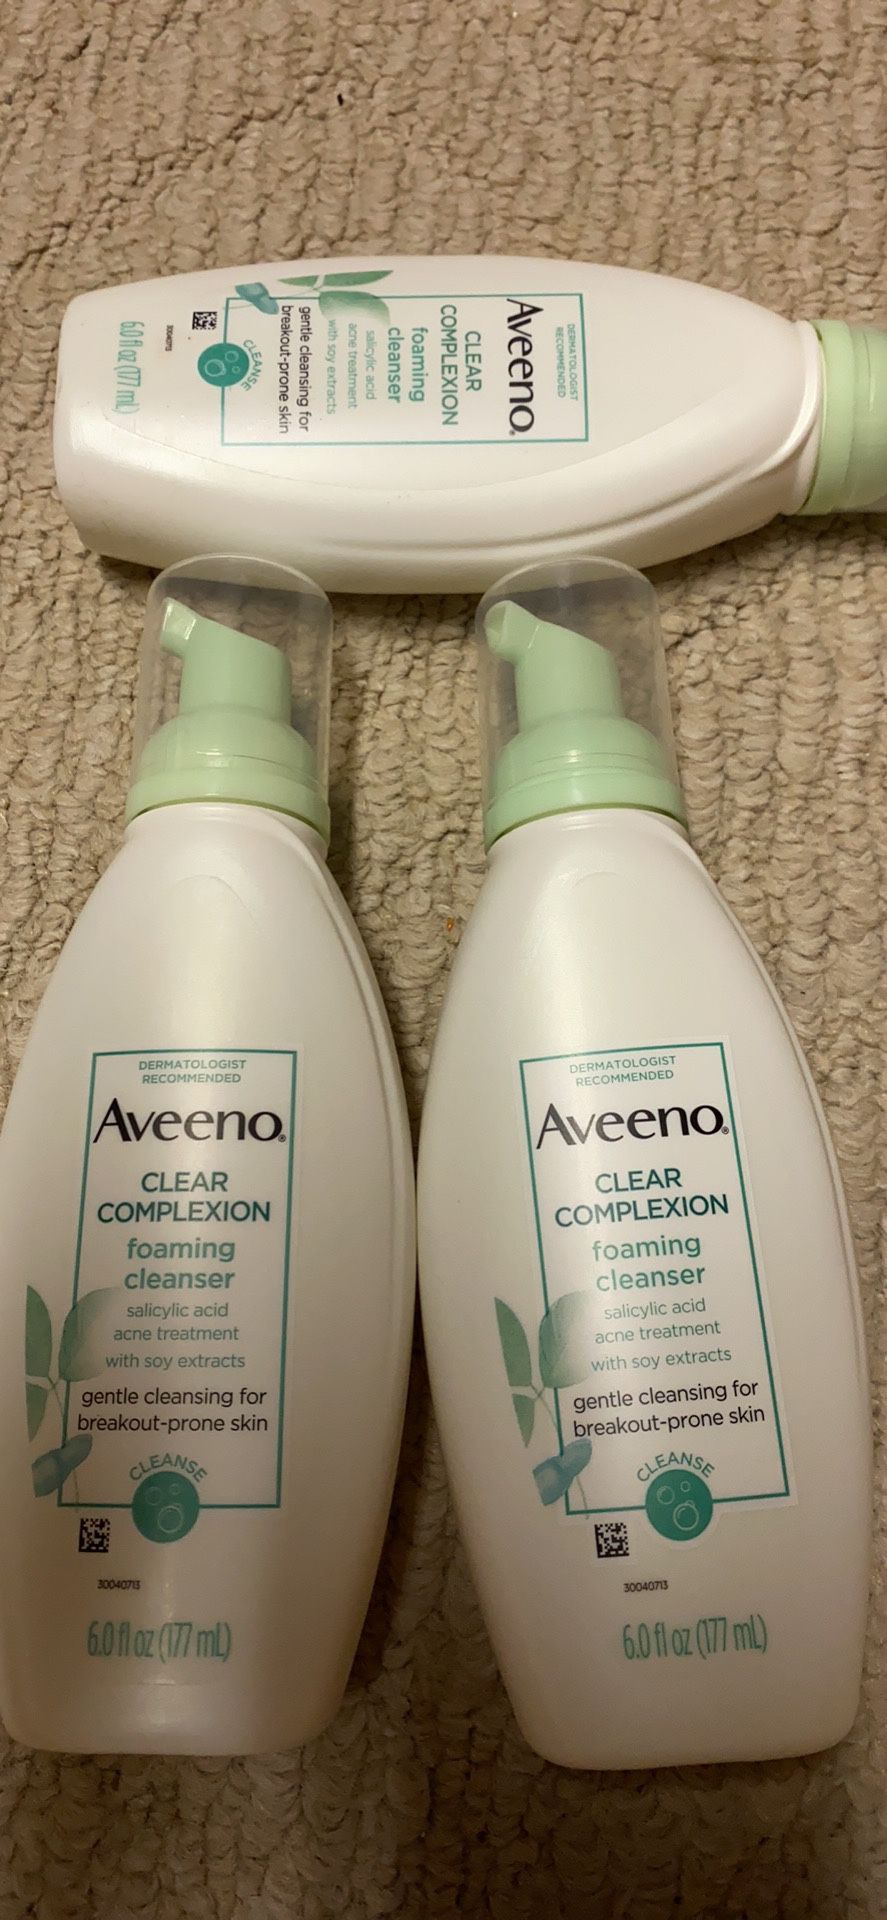 Aveeno Clear complexion foaming cleanser